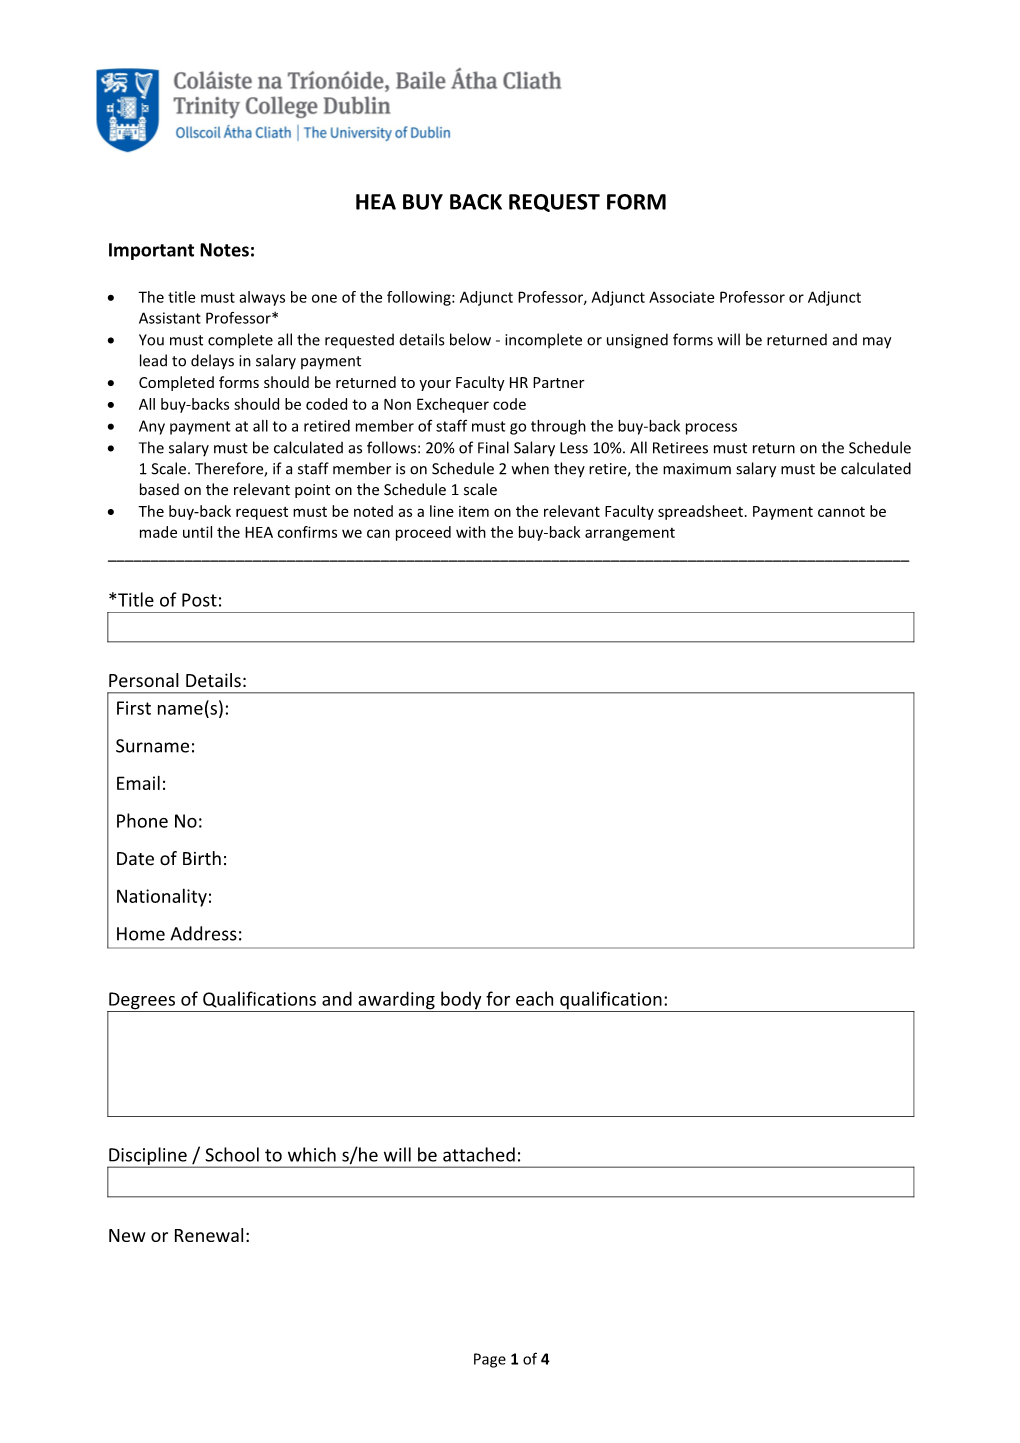 Hea Buy Back Request Form